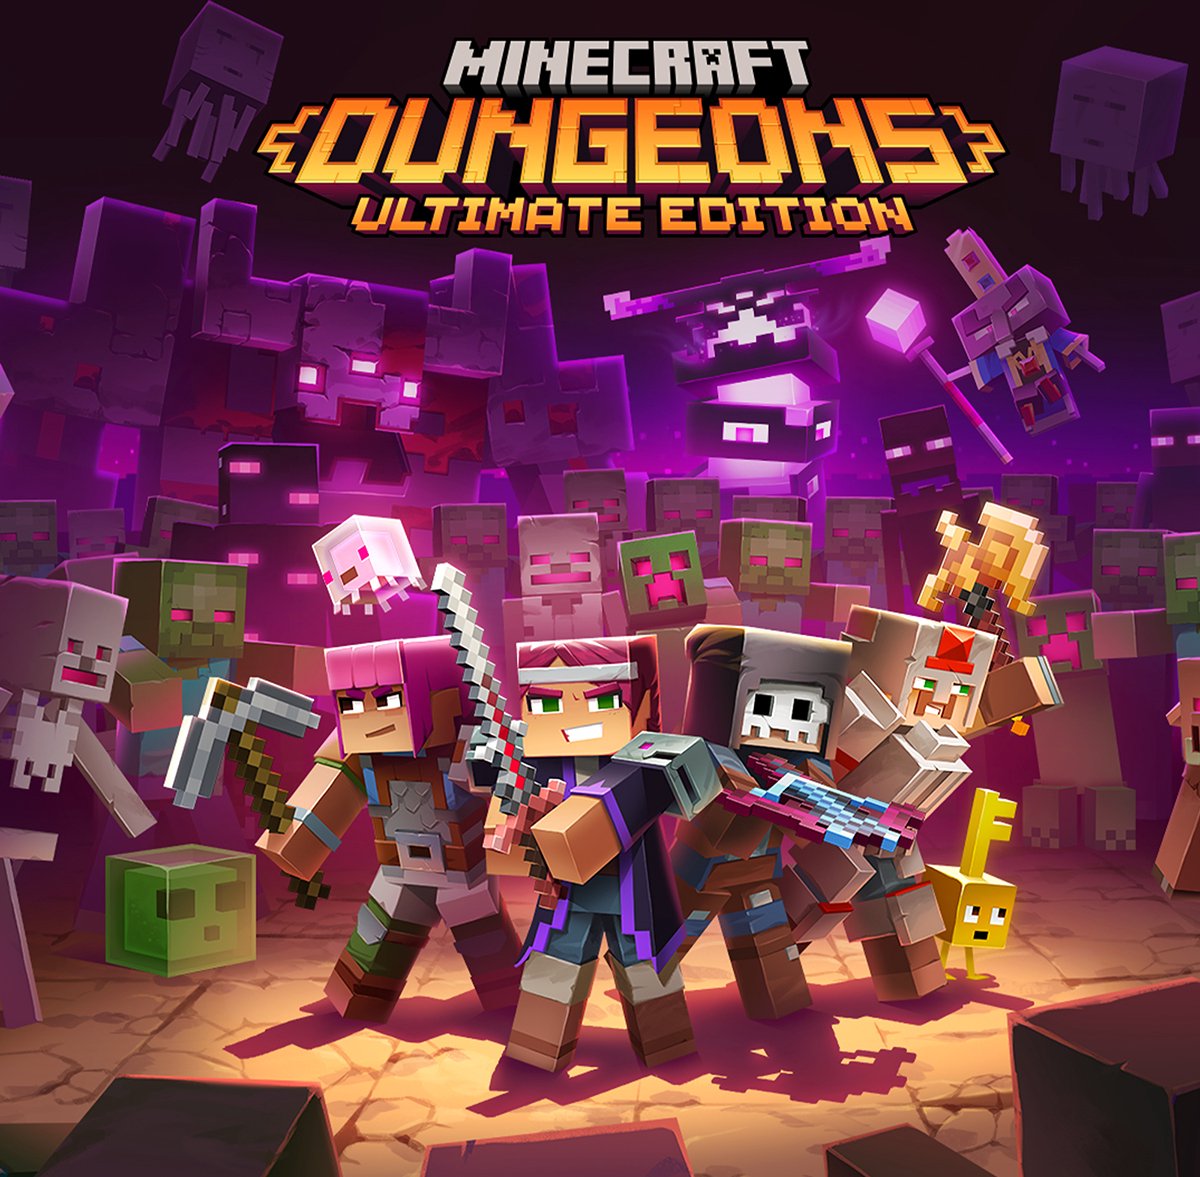 Minecraft Dungeons - Ultimate Edition (PC), Mojang